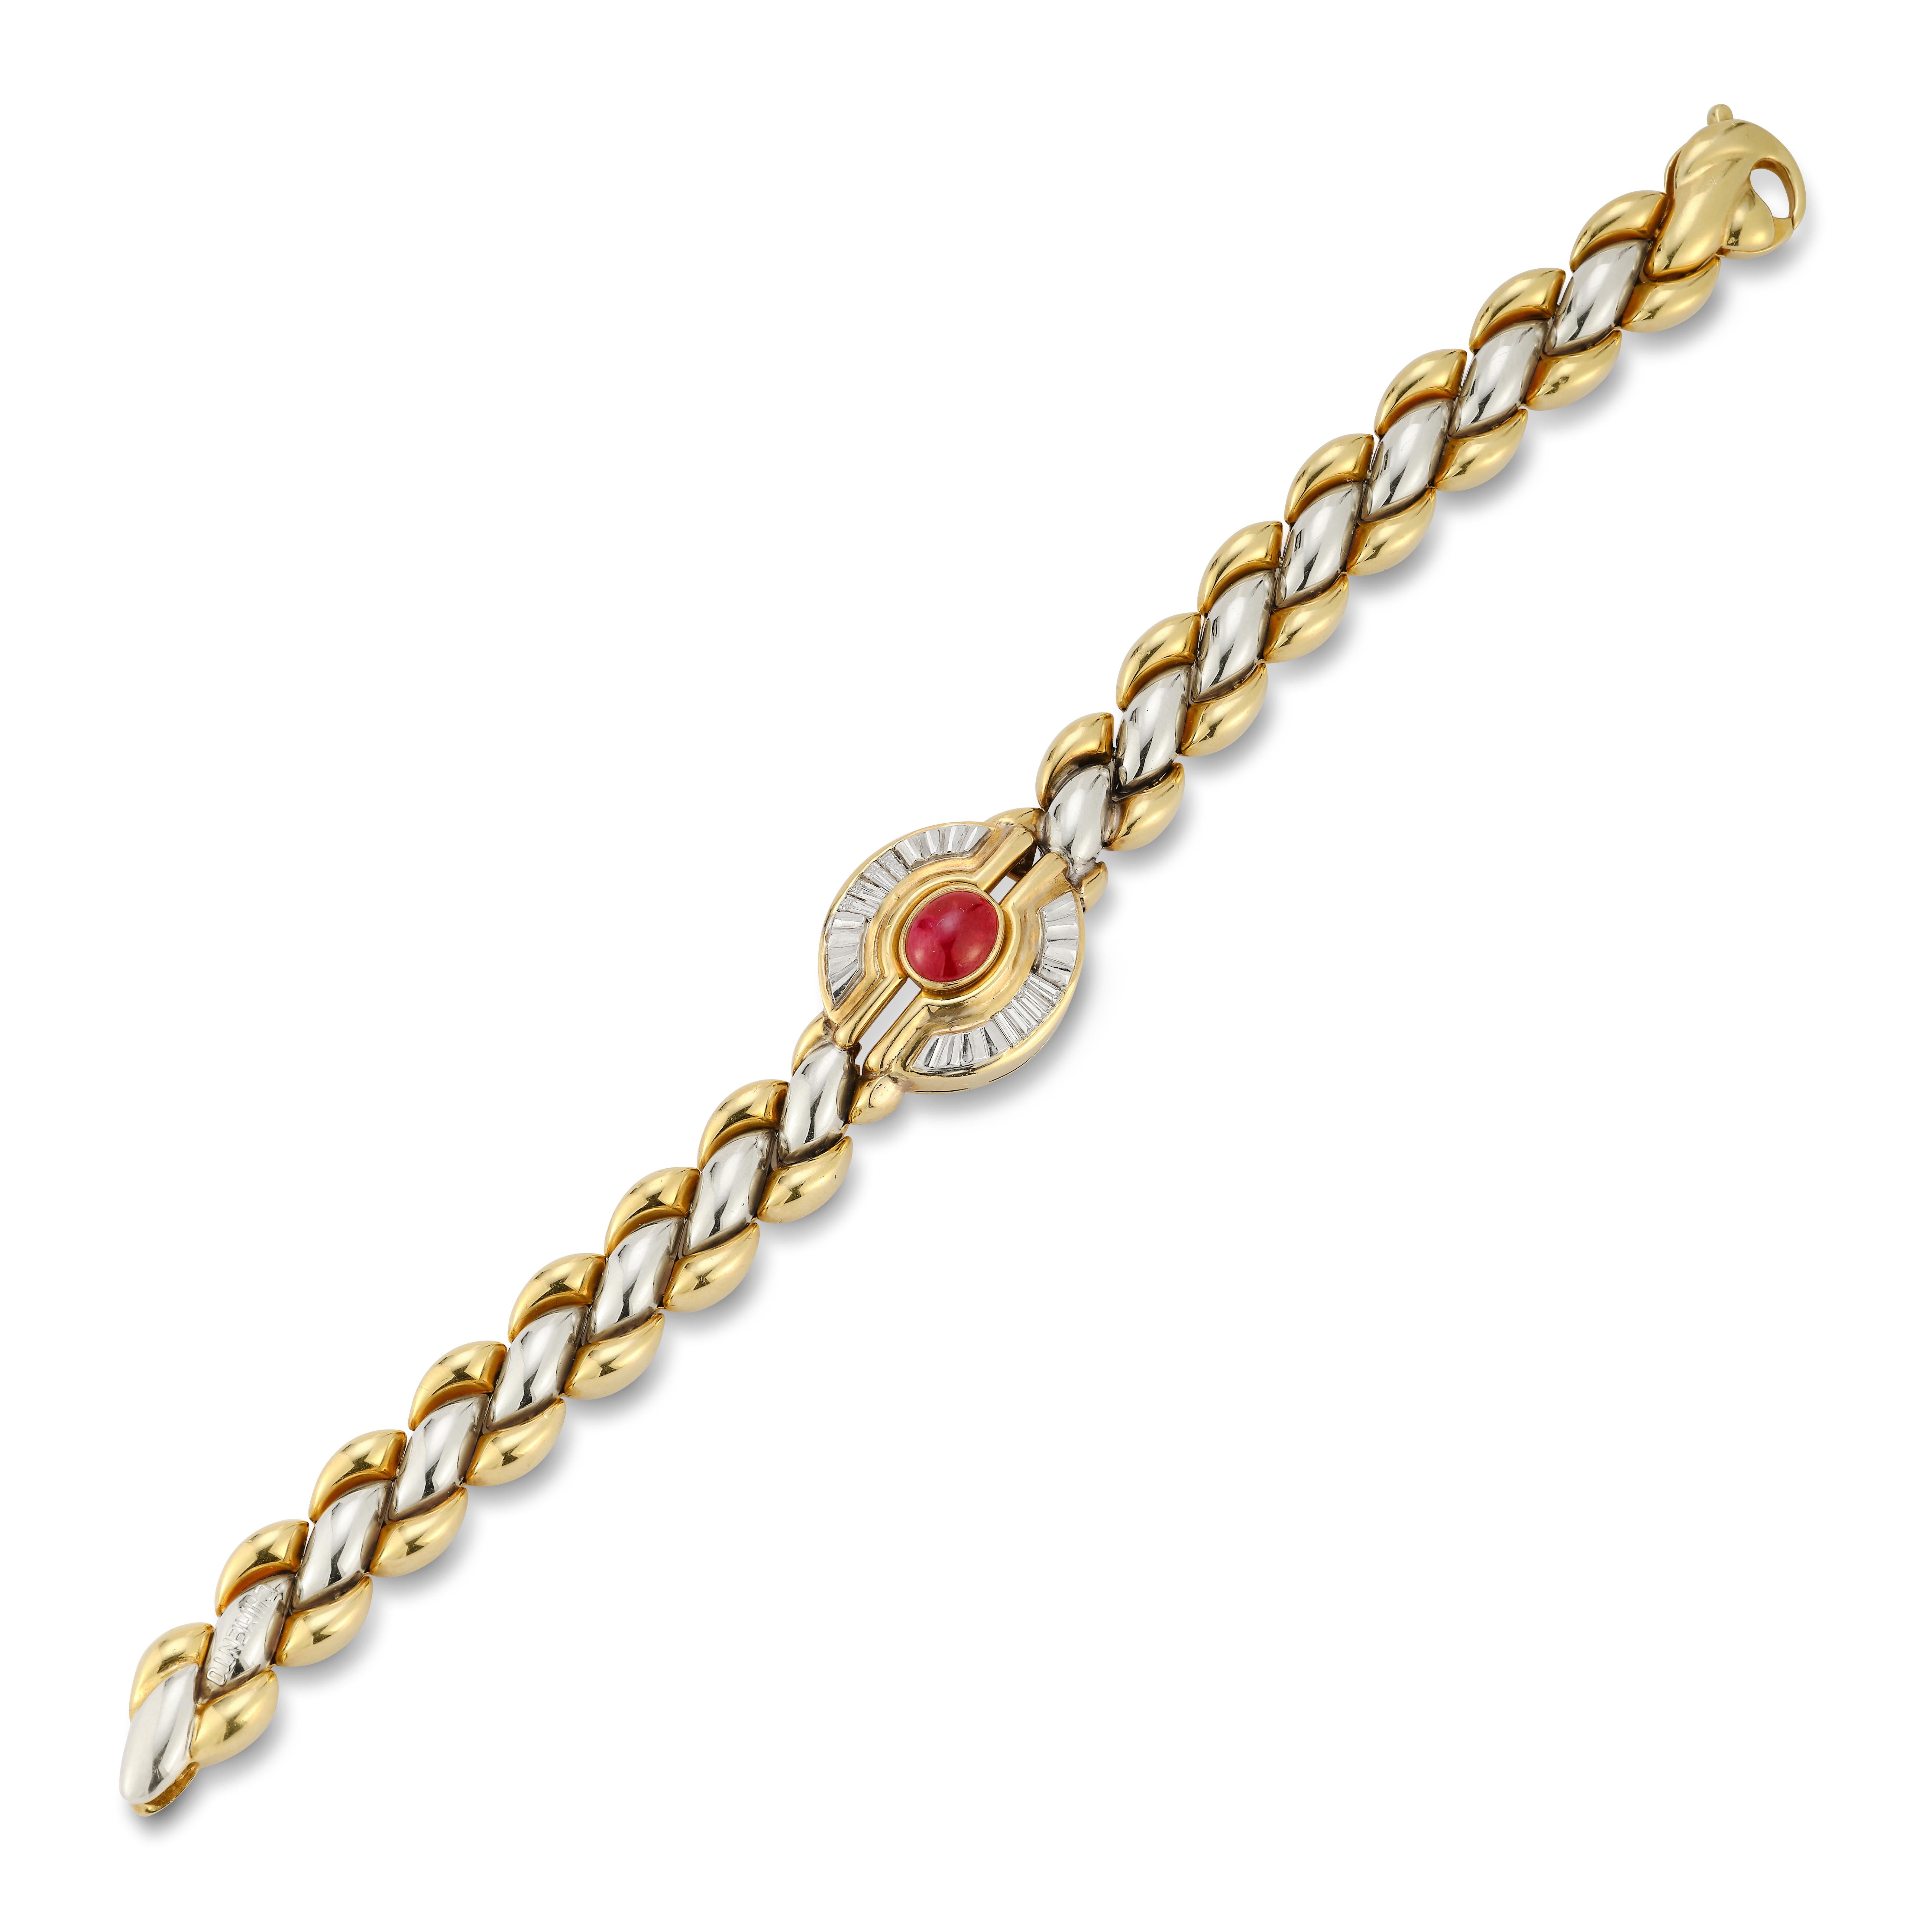 18 karat yellow and white gold bracelet with 1 cabochon ruby on the center approx 2.20 carat, 8 baguettes diamonds approx .054 carat

18 karat yellow gold
7.5 inches long 

40.6 Grams